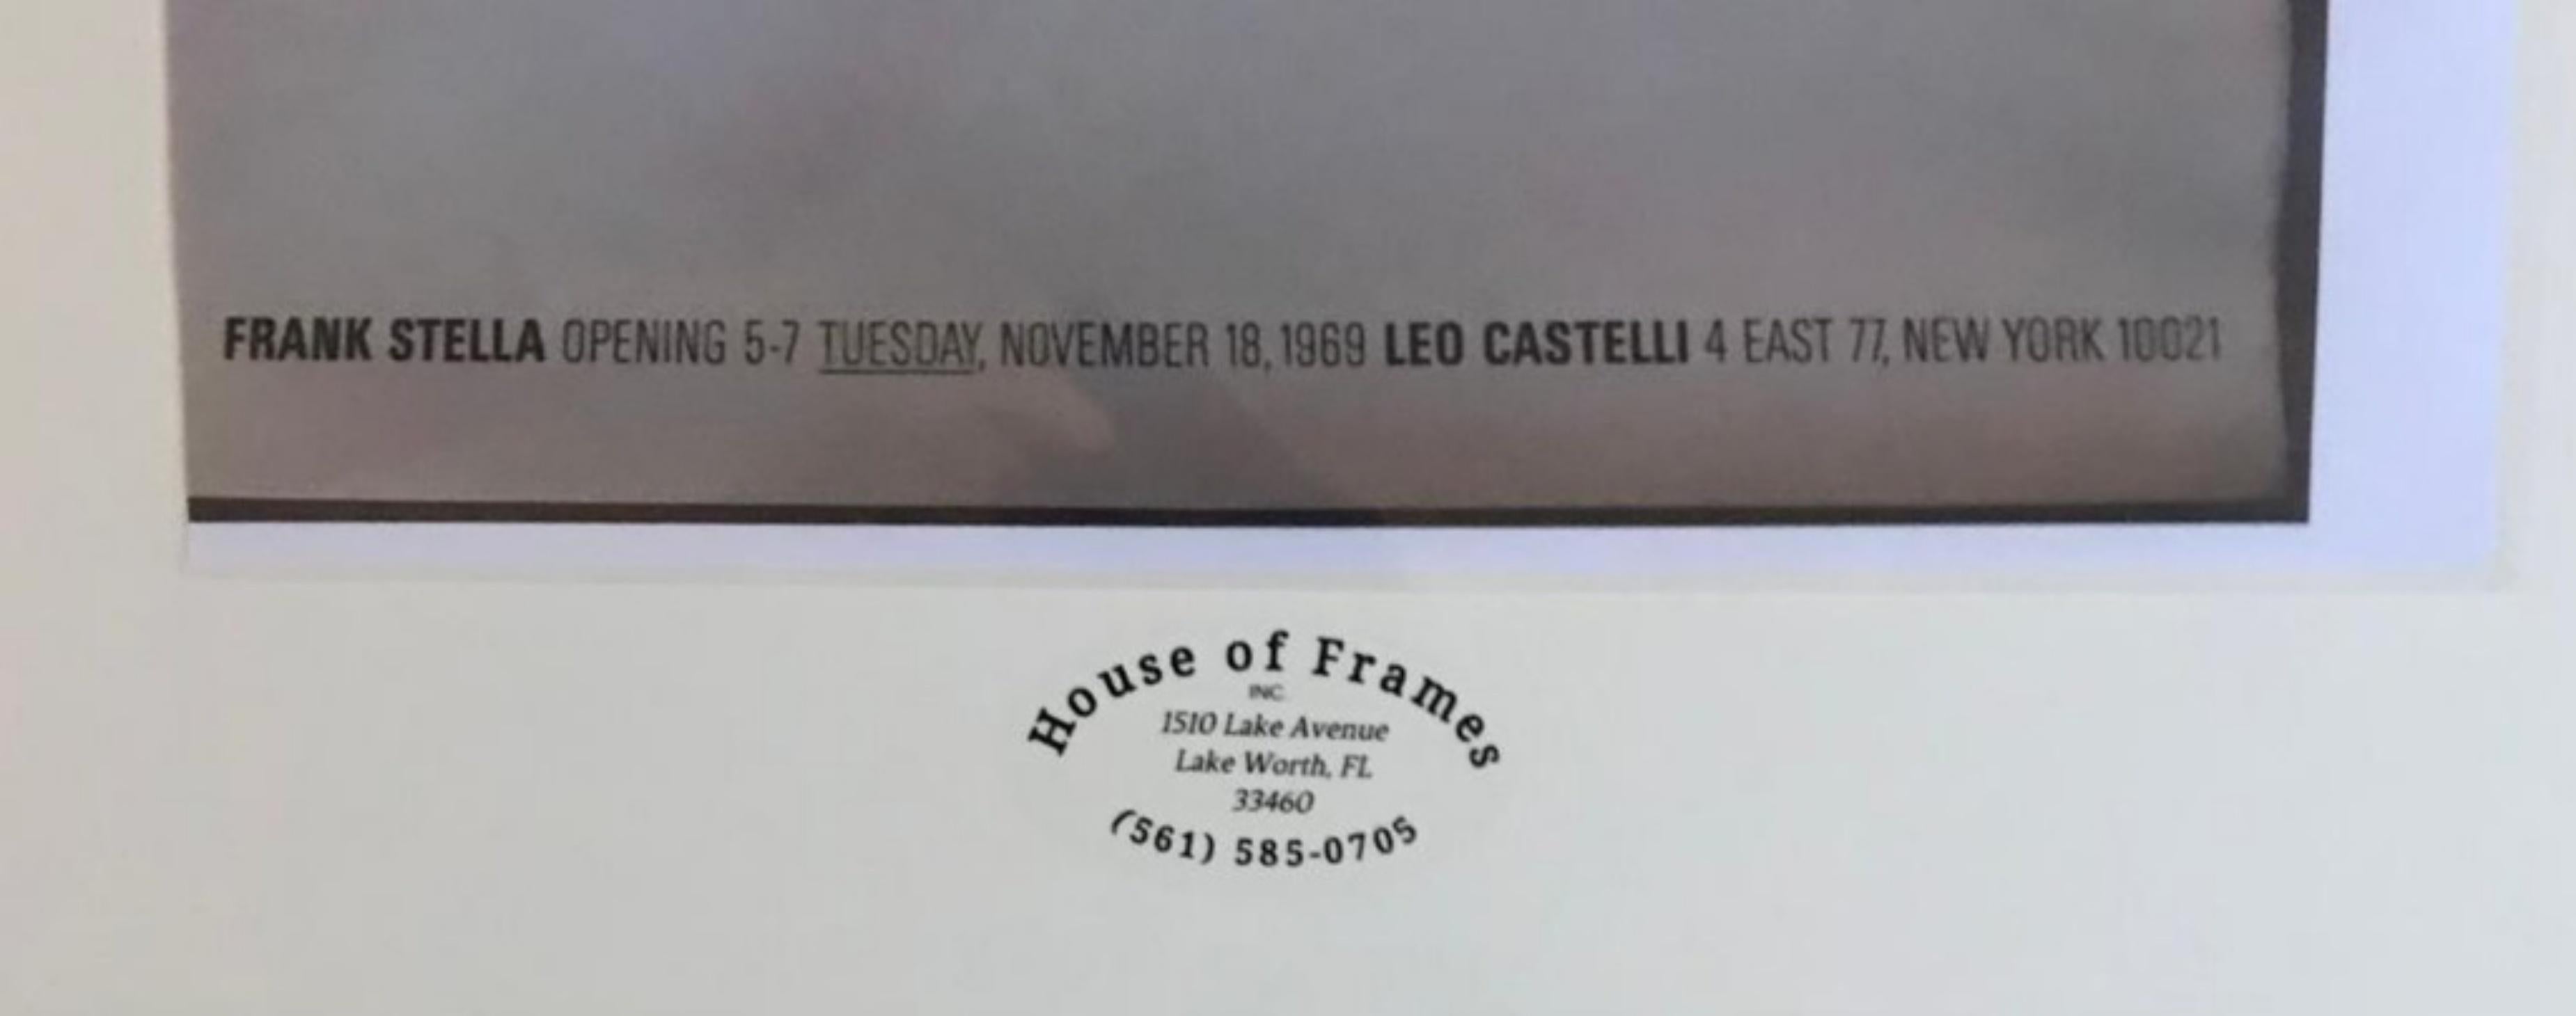 Historic Leo Castelli Gallery poster invite hand signed & dated by Frank Stella For Sale 2